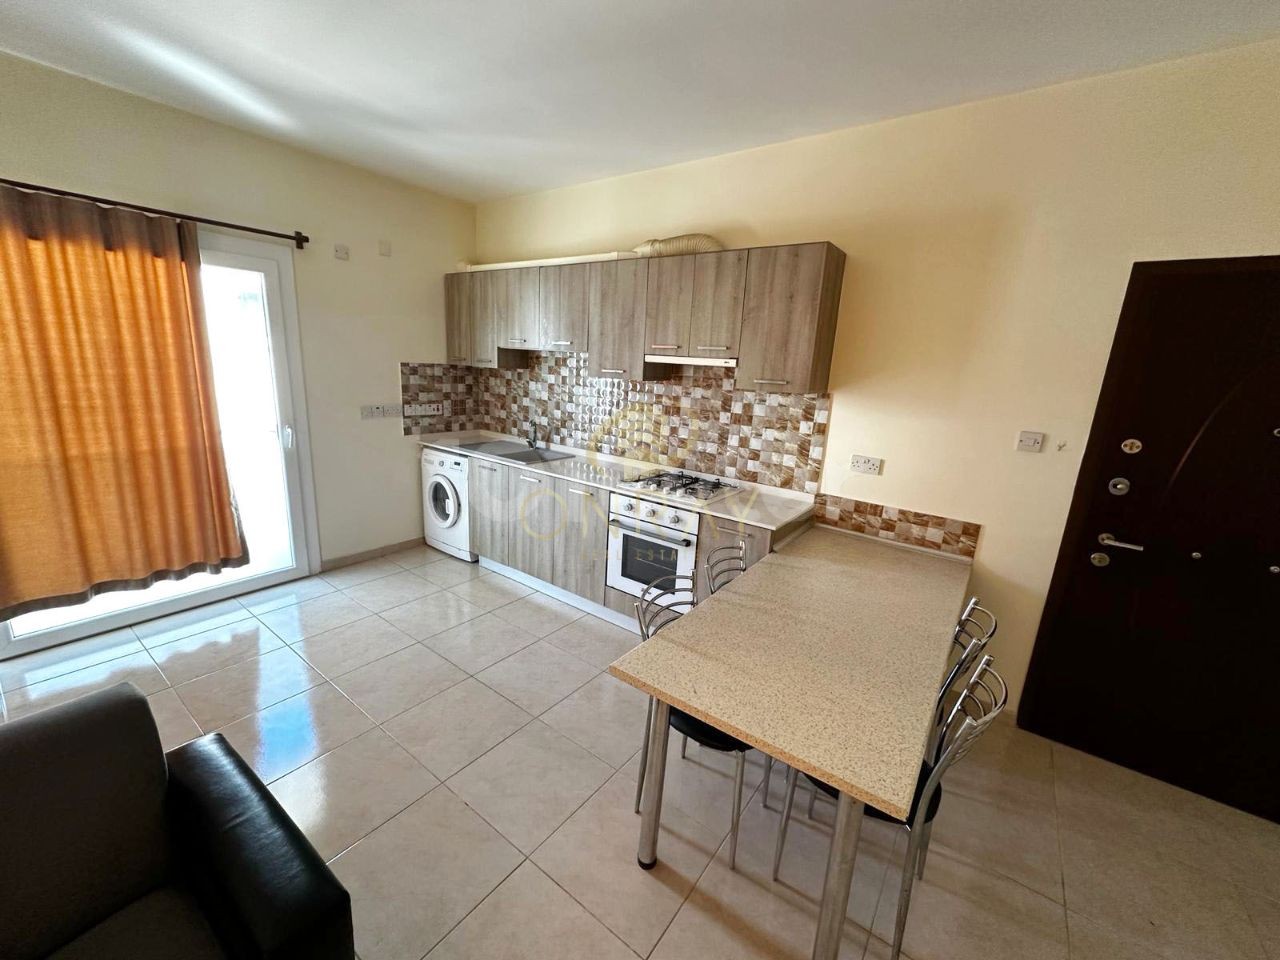 2+1 Fully Furnished Flat for Rent in Yenikent Region